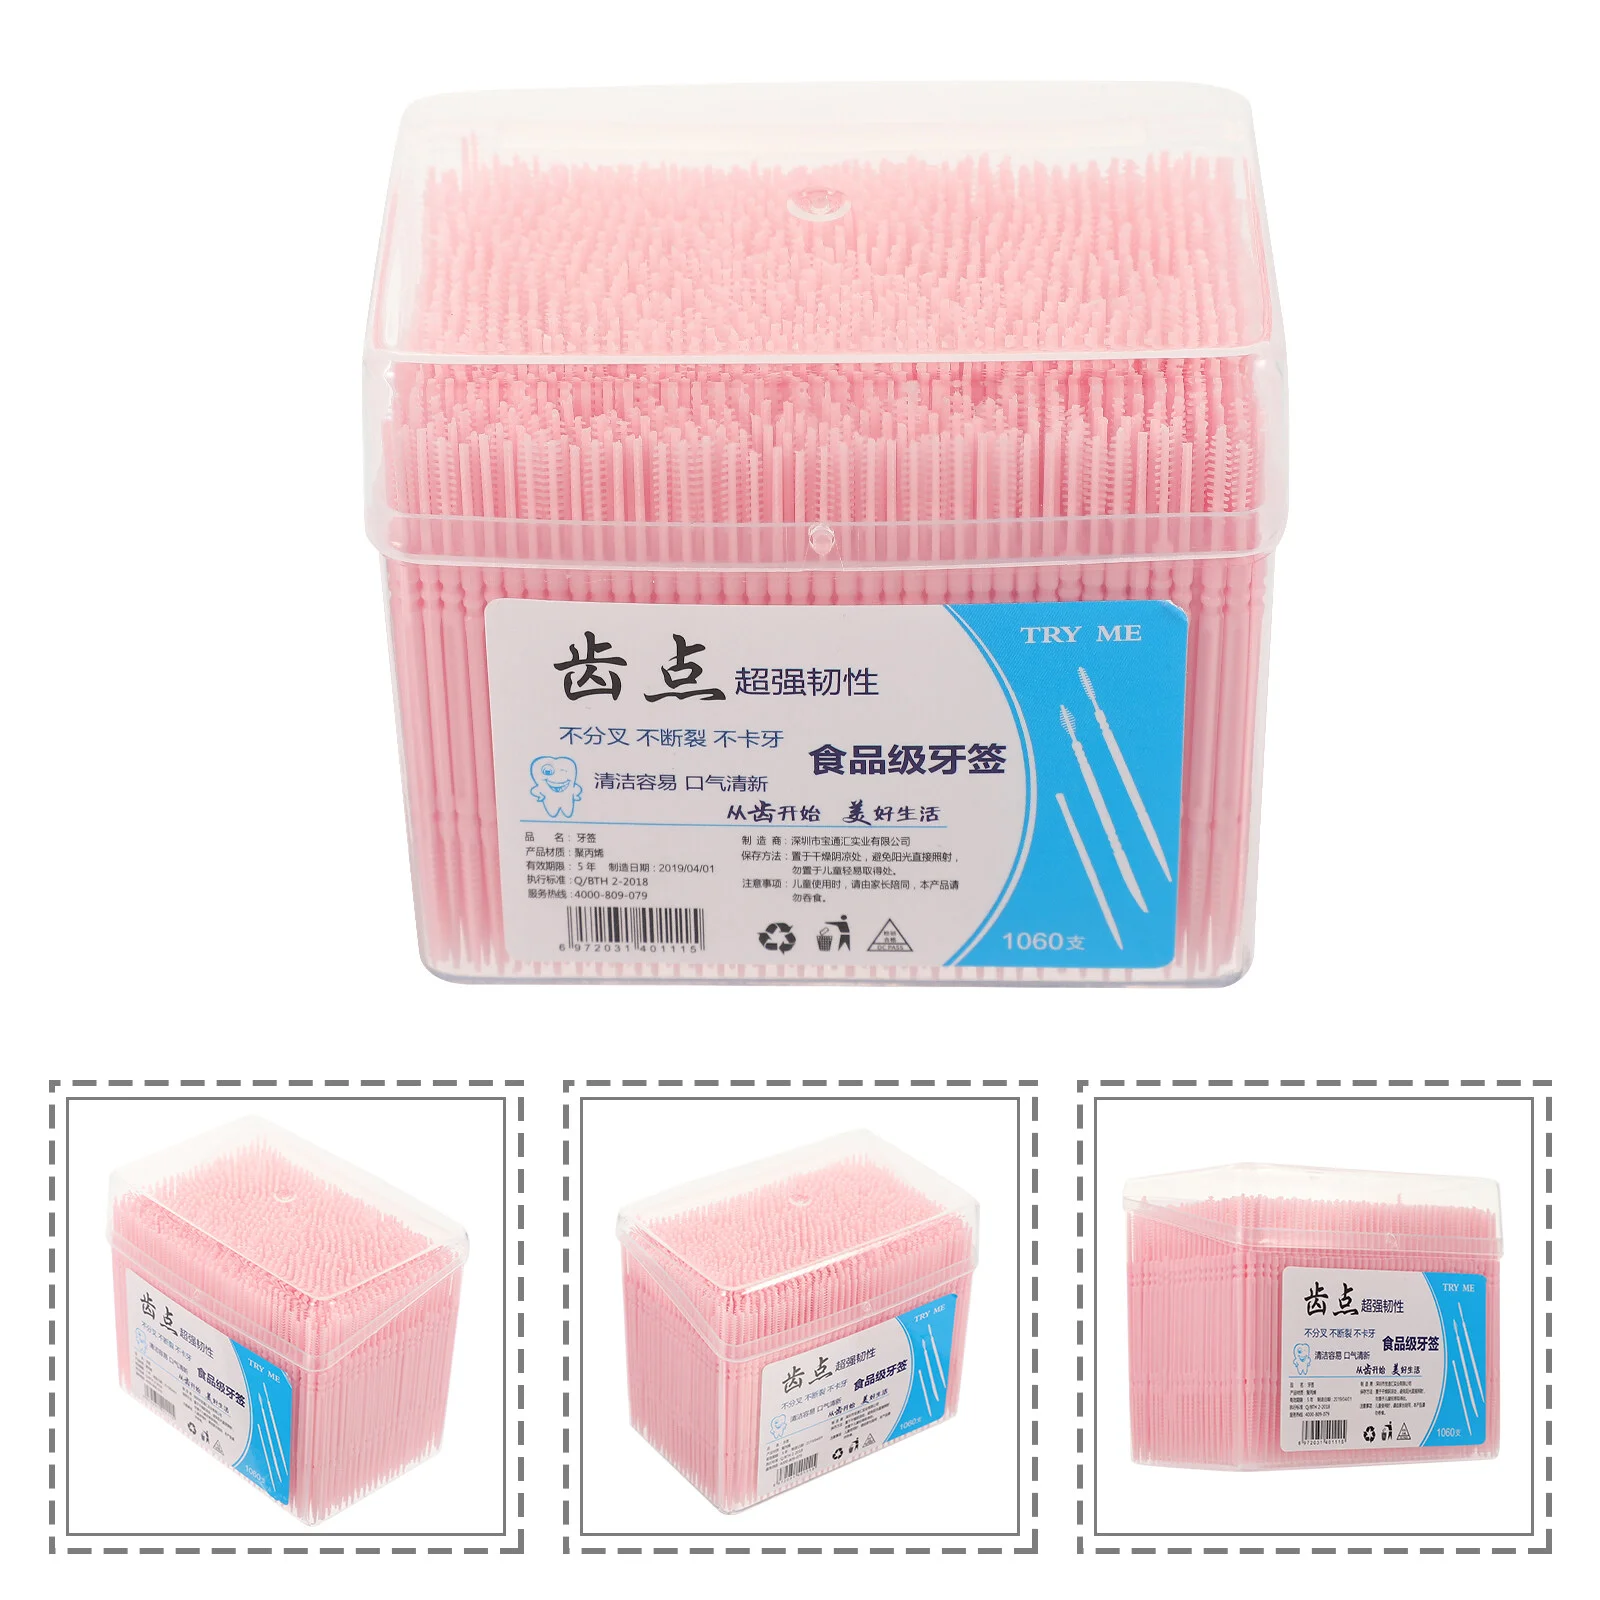 

1060 Pcs Toothpick Cleaners Disposable Braces Toothpicks Sanitary Brush Plastic Child Brushes